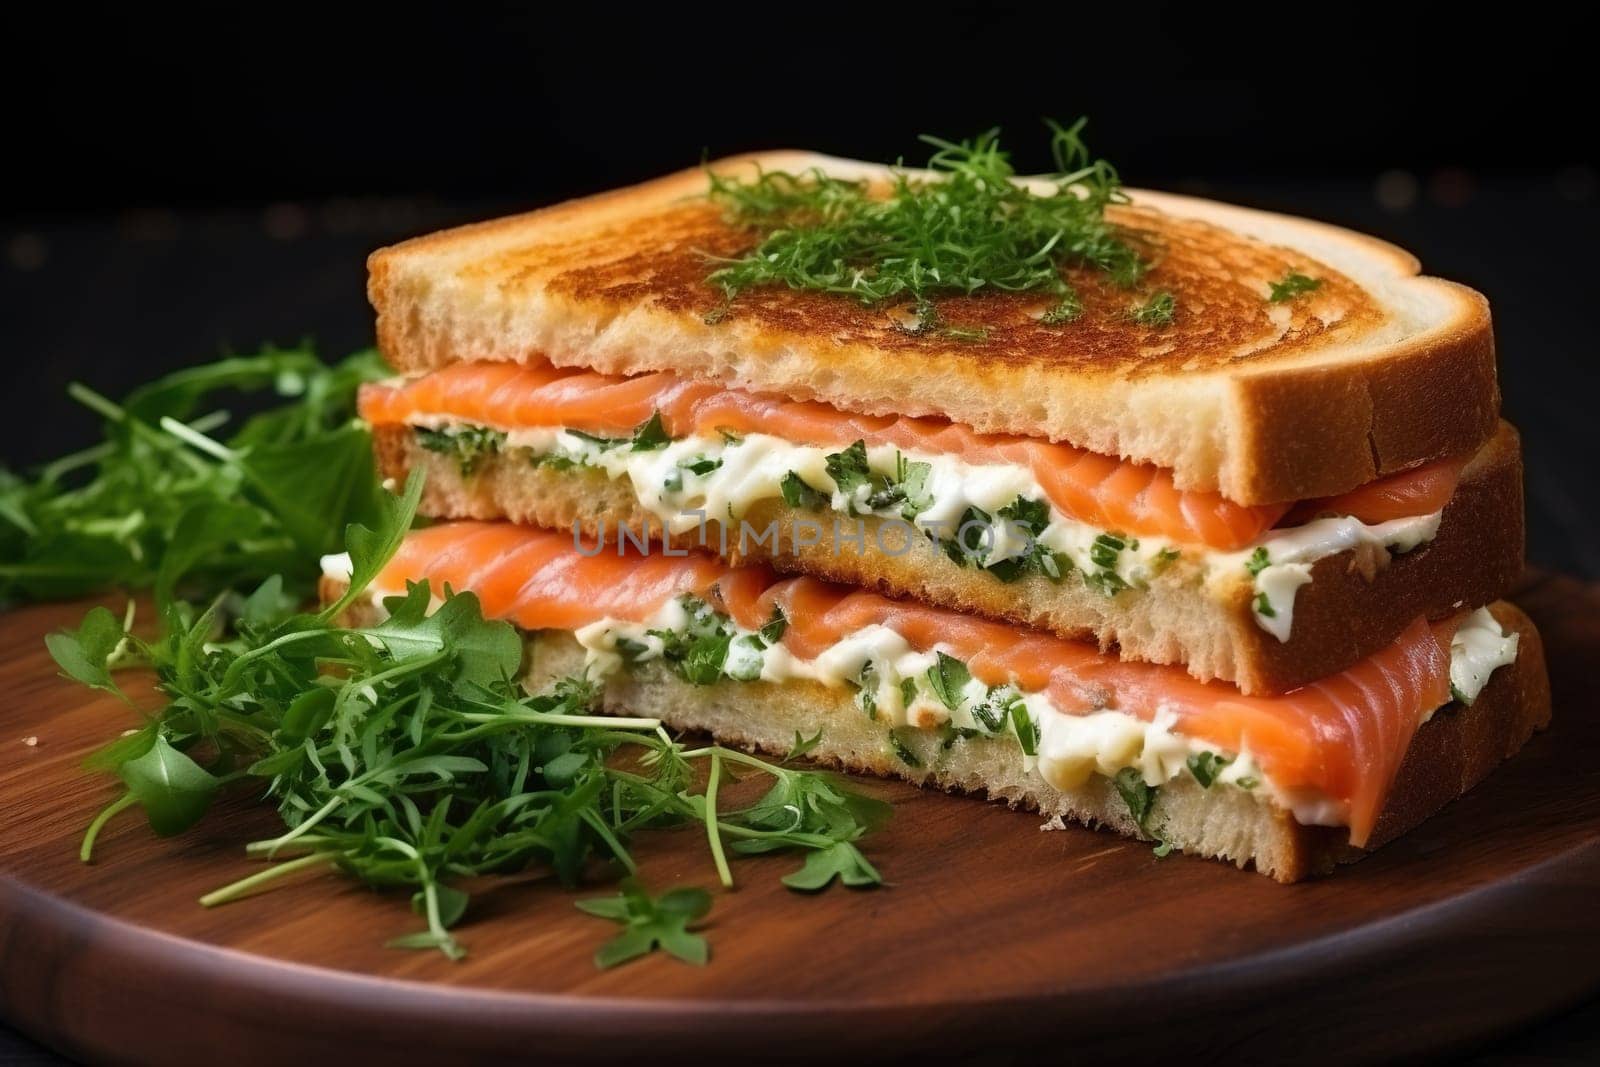 Sandwich with salmon and greens on a wooden tabletop.